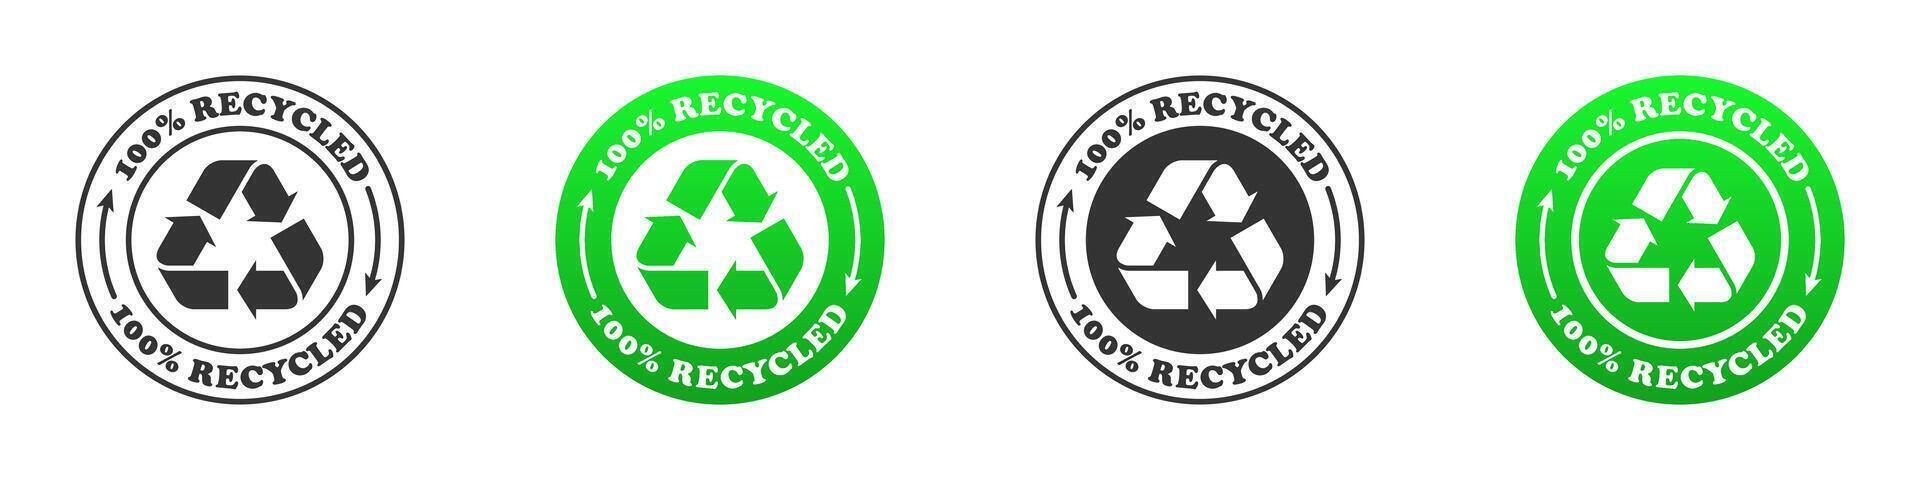 Recycled icon set. Vector illustration.